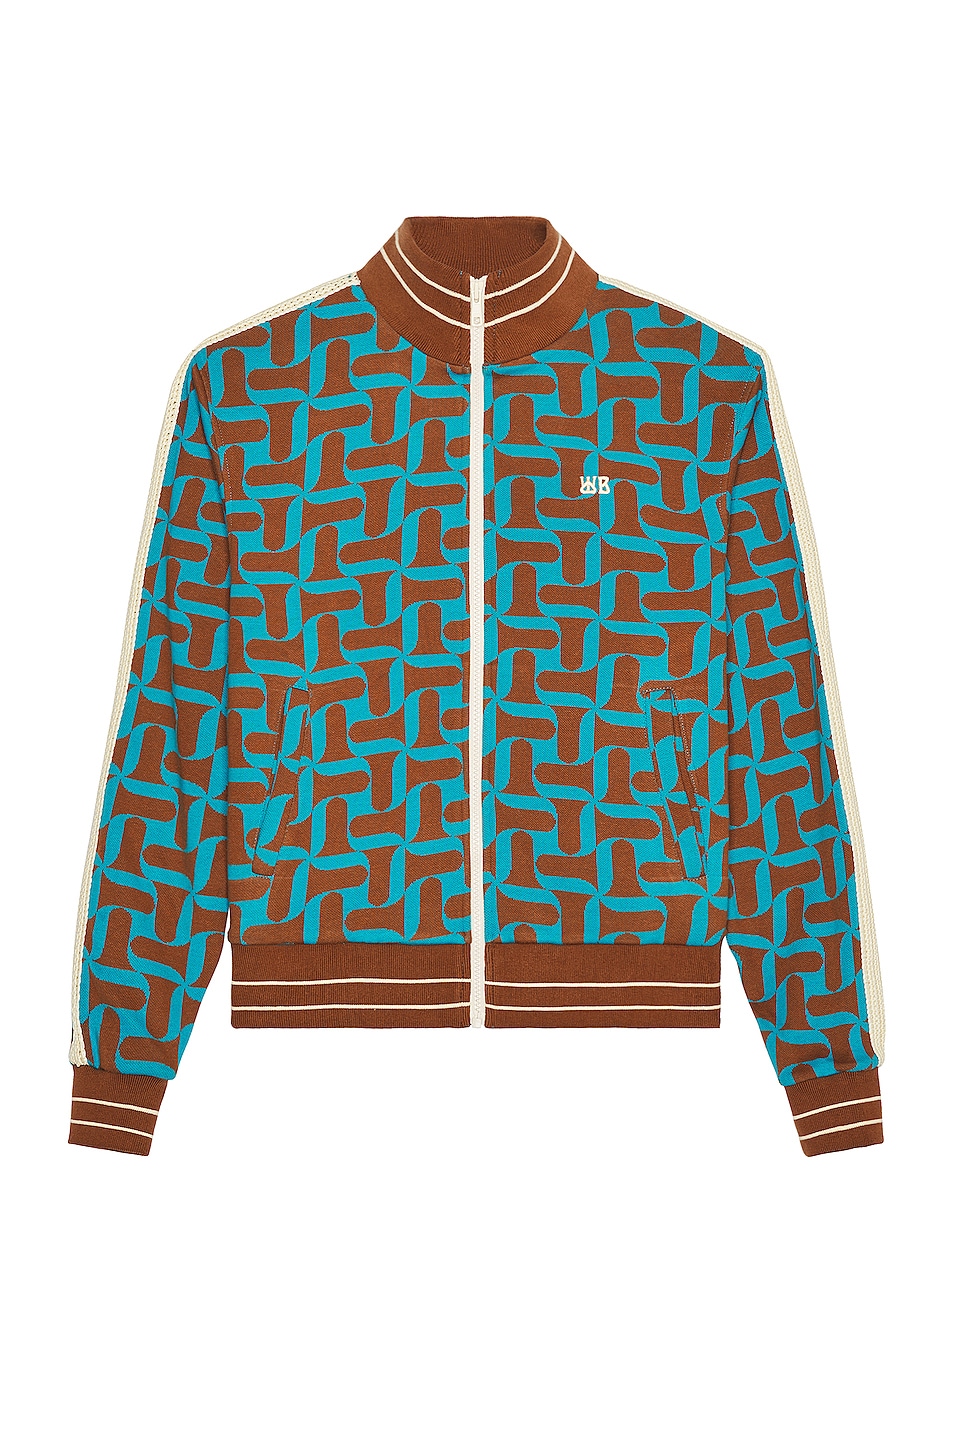 Image 1 of Wales Bonner Symphony Track Top in Algiers Blue & Brown